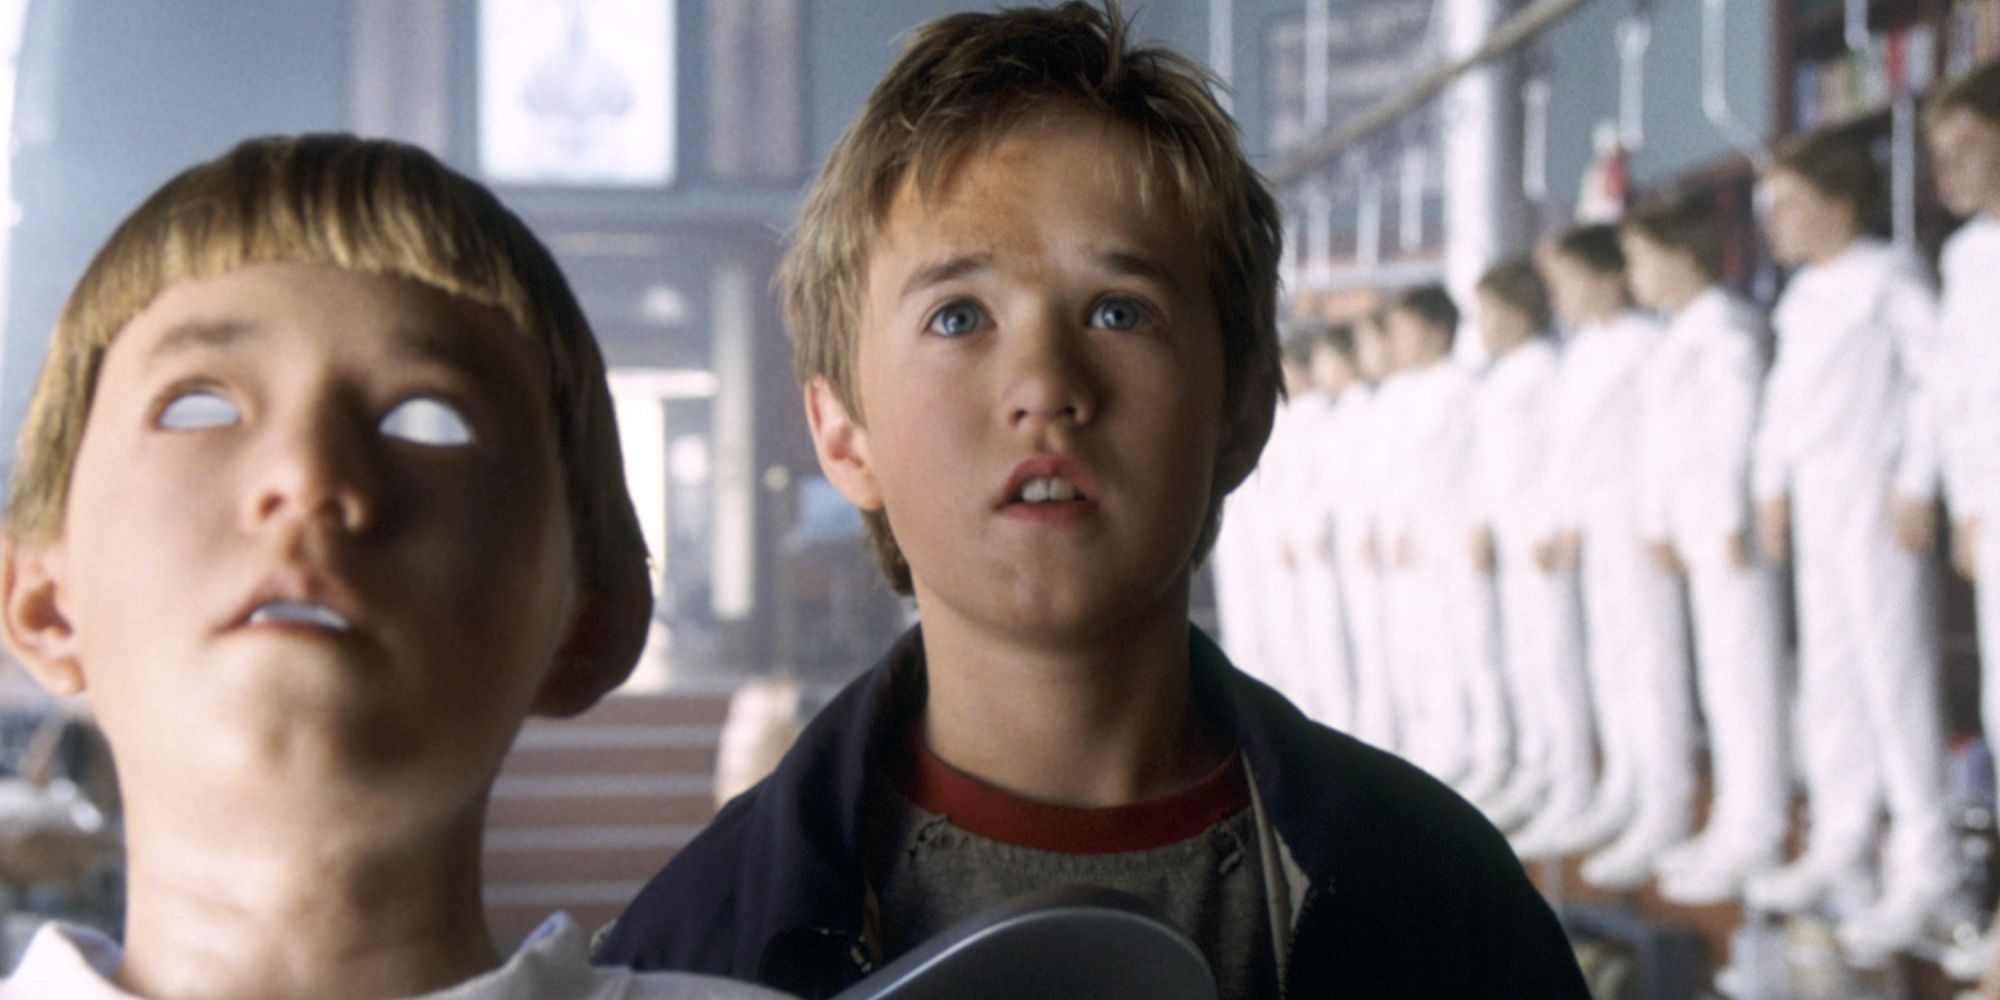 Haley Joel Osment with other robot children in A.I. Artificial Intelligence.